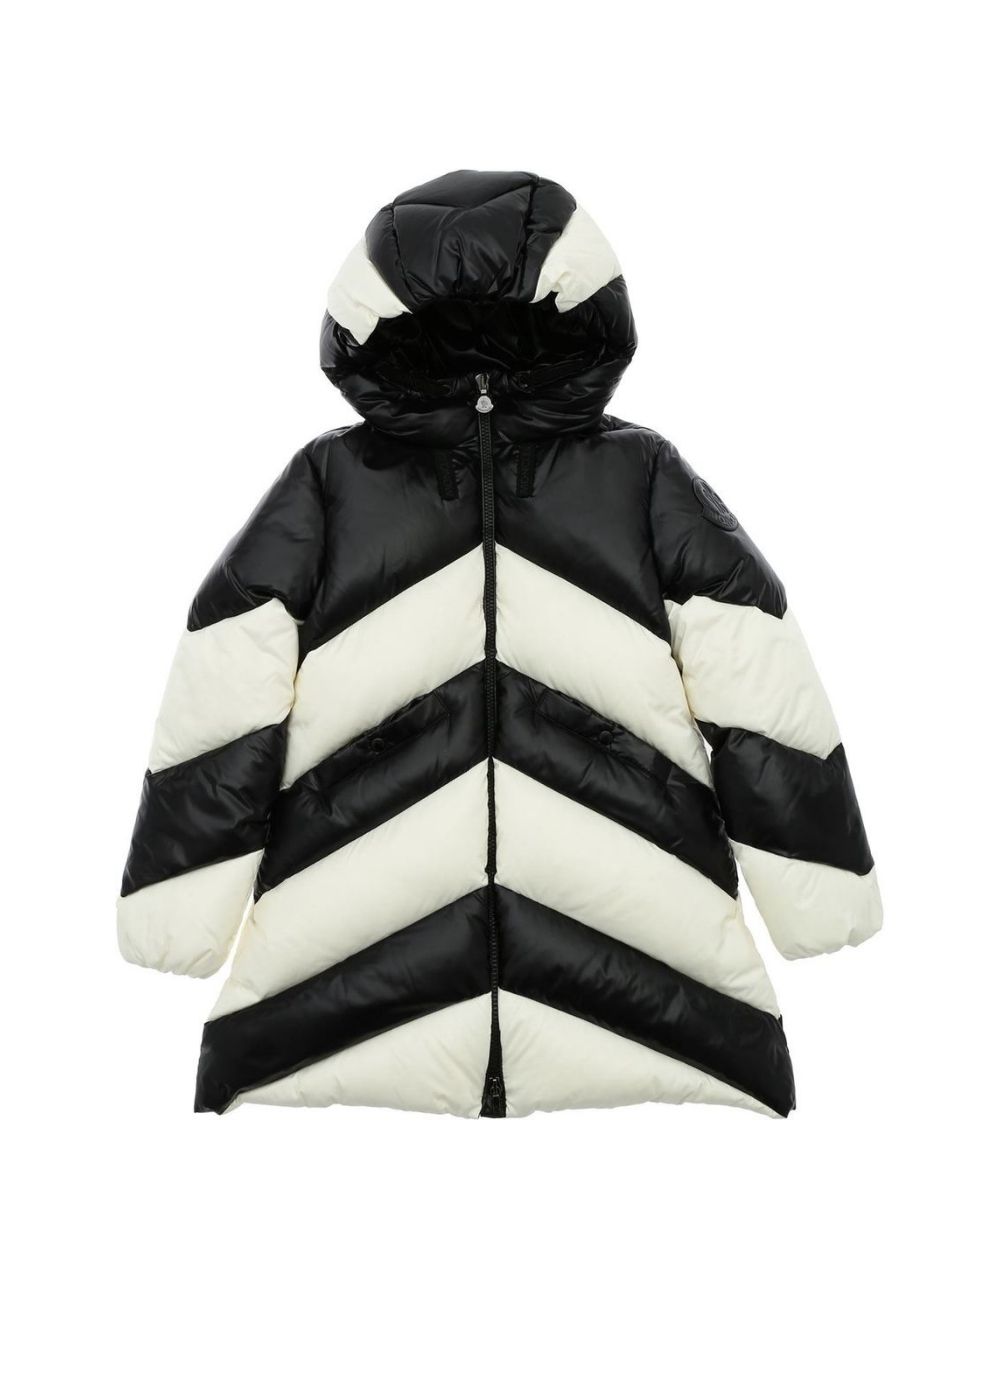 Featured image for “MONCLER FAUCILLE”